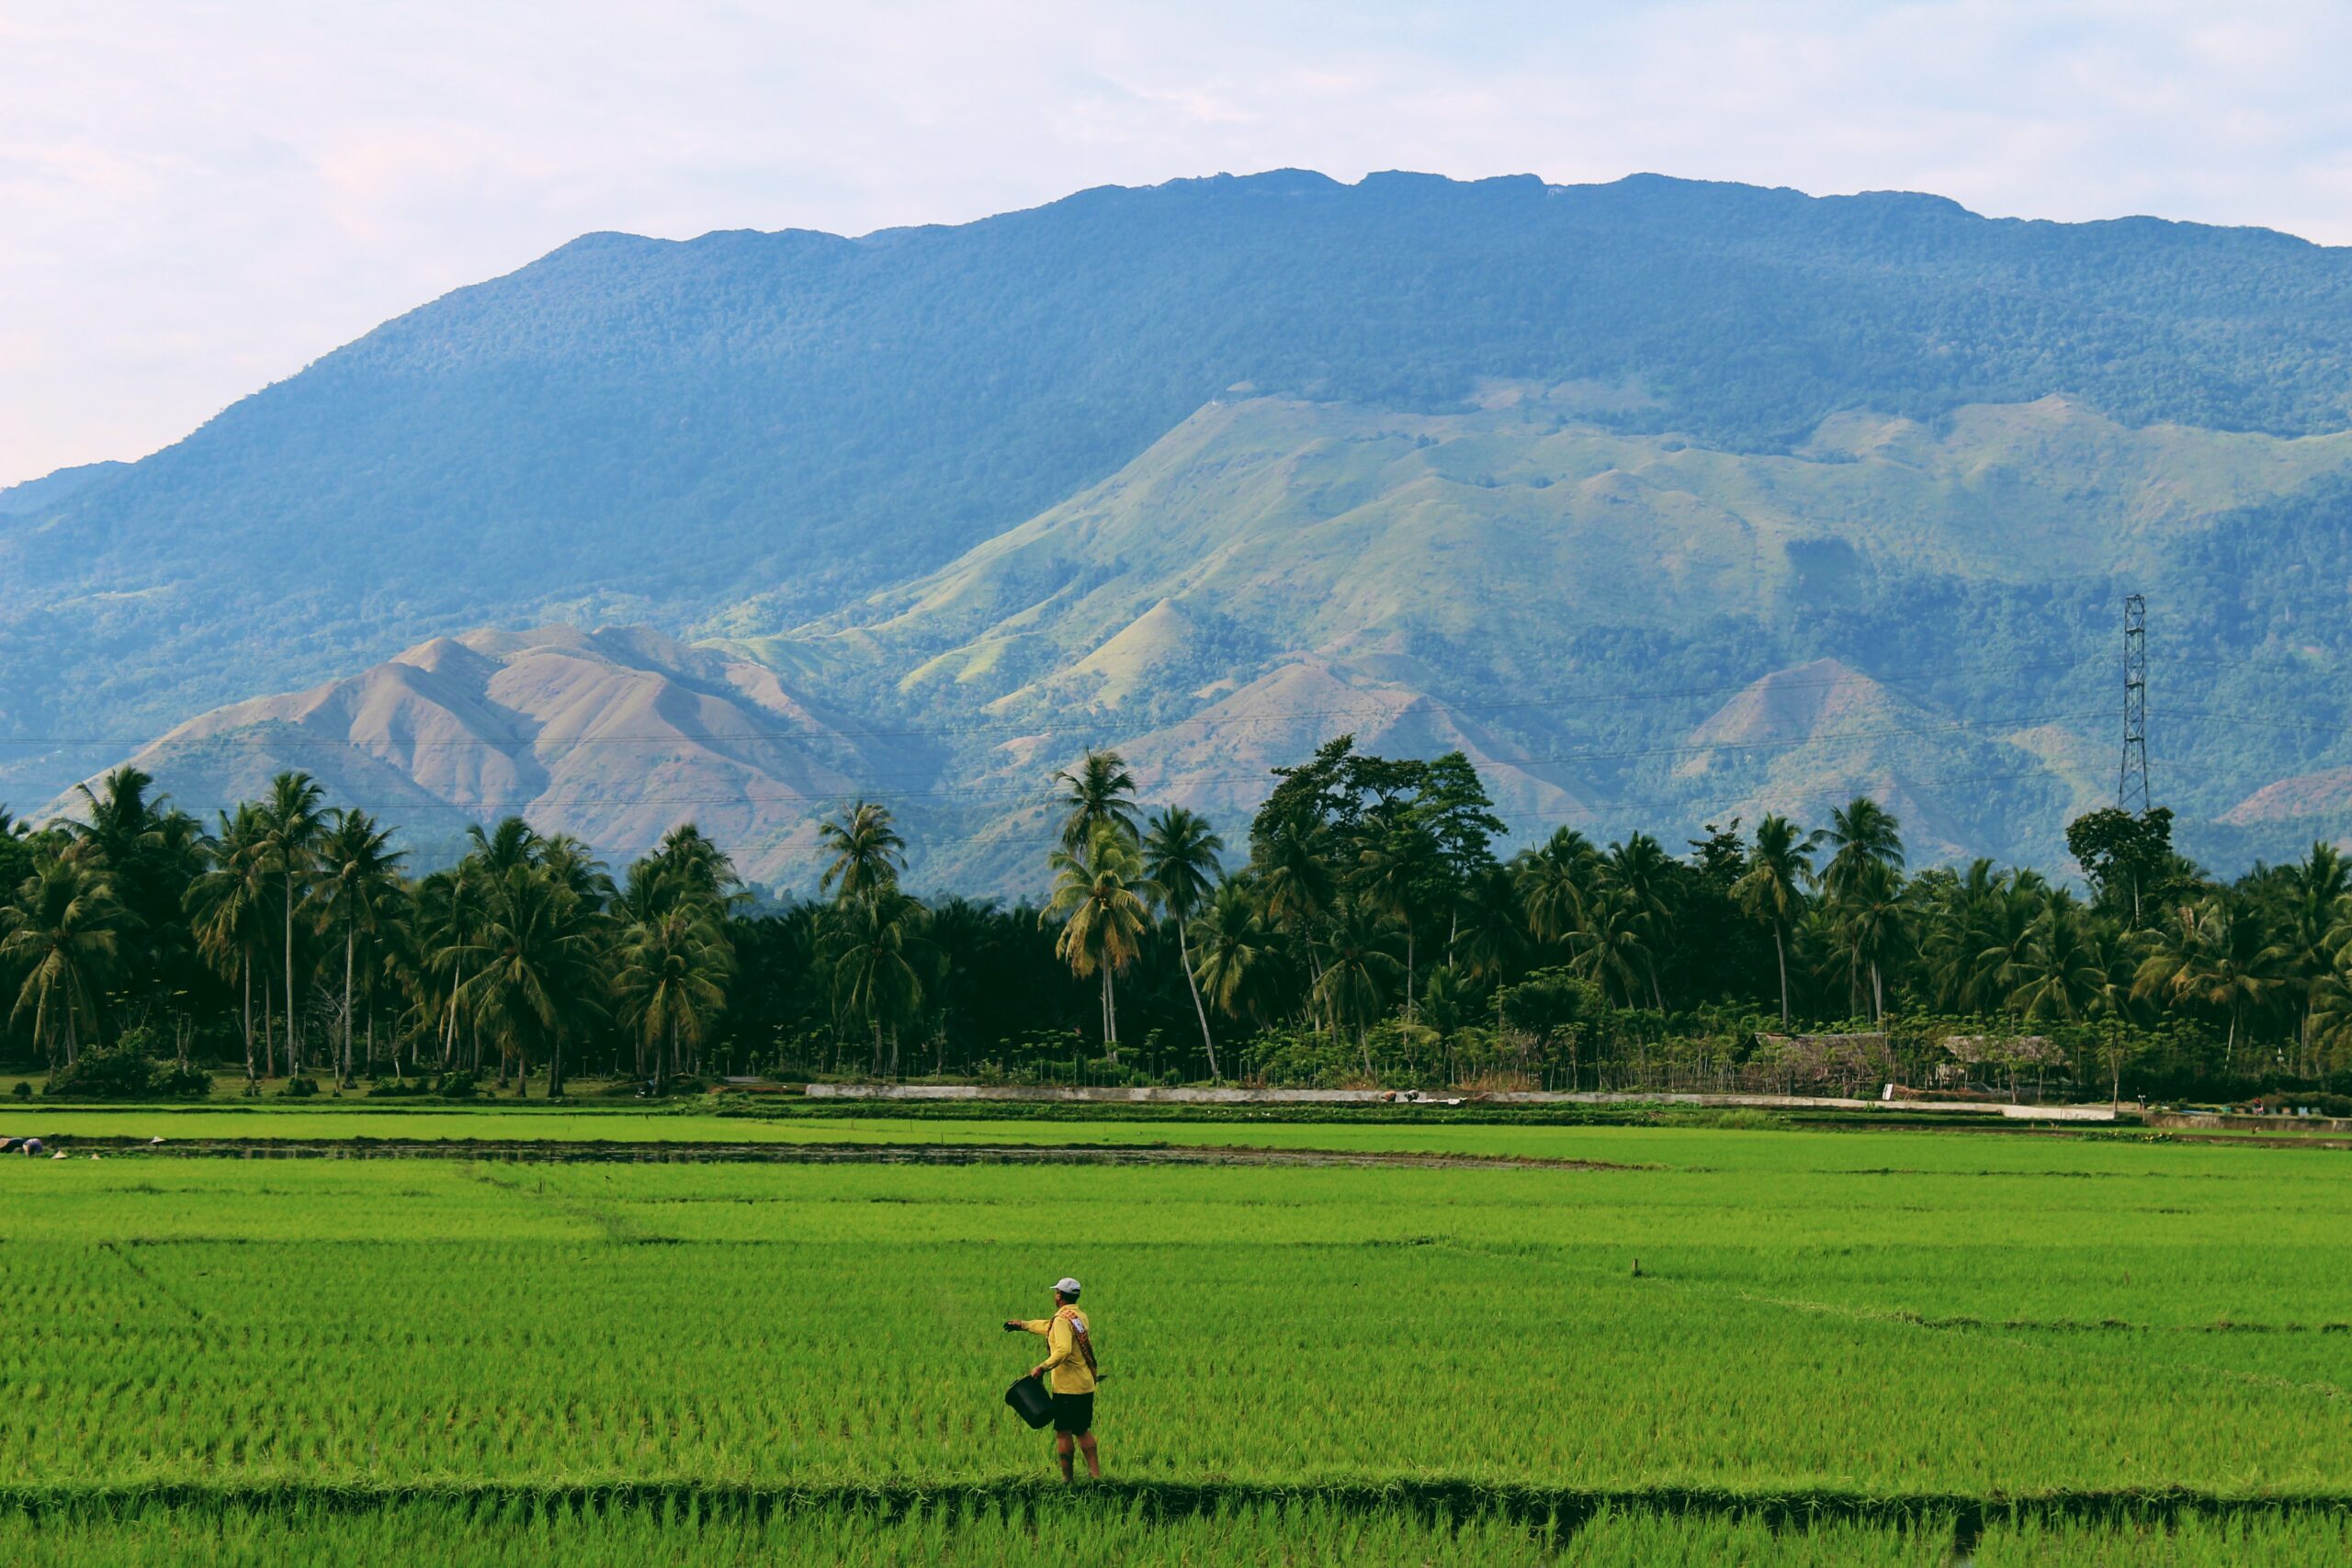 Cellulosic Ethanol Could Be Major Boon To Indonesian Small Farmers. Source: Unsplash